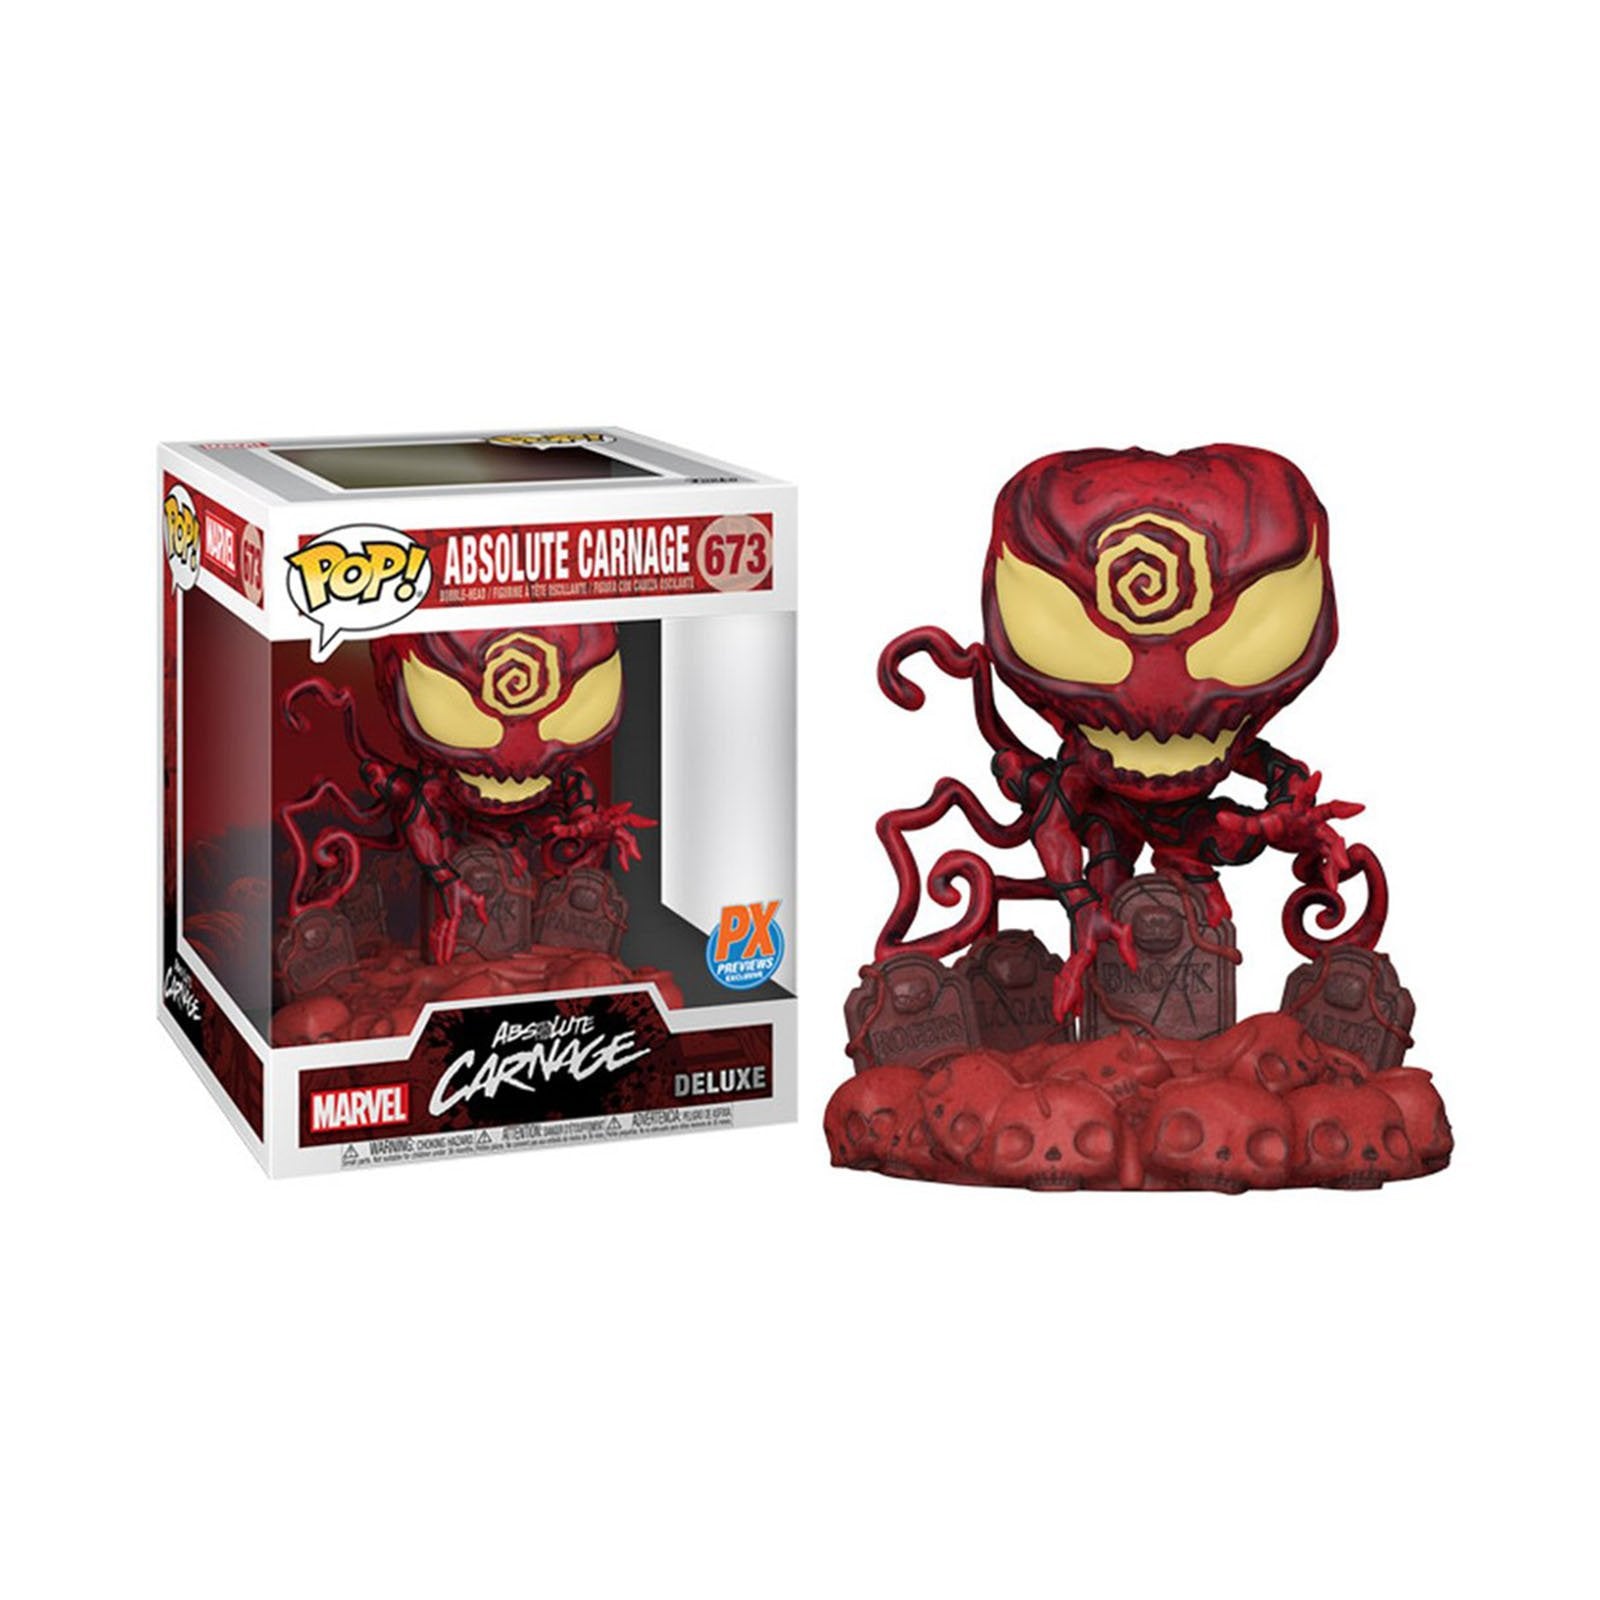 Picasso Gemoedsrust Uitputting Funko Marvel PX Exclusive POP Deluxe Absolute Carnage Set | Radar Toys